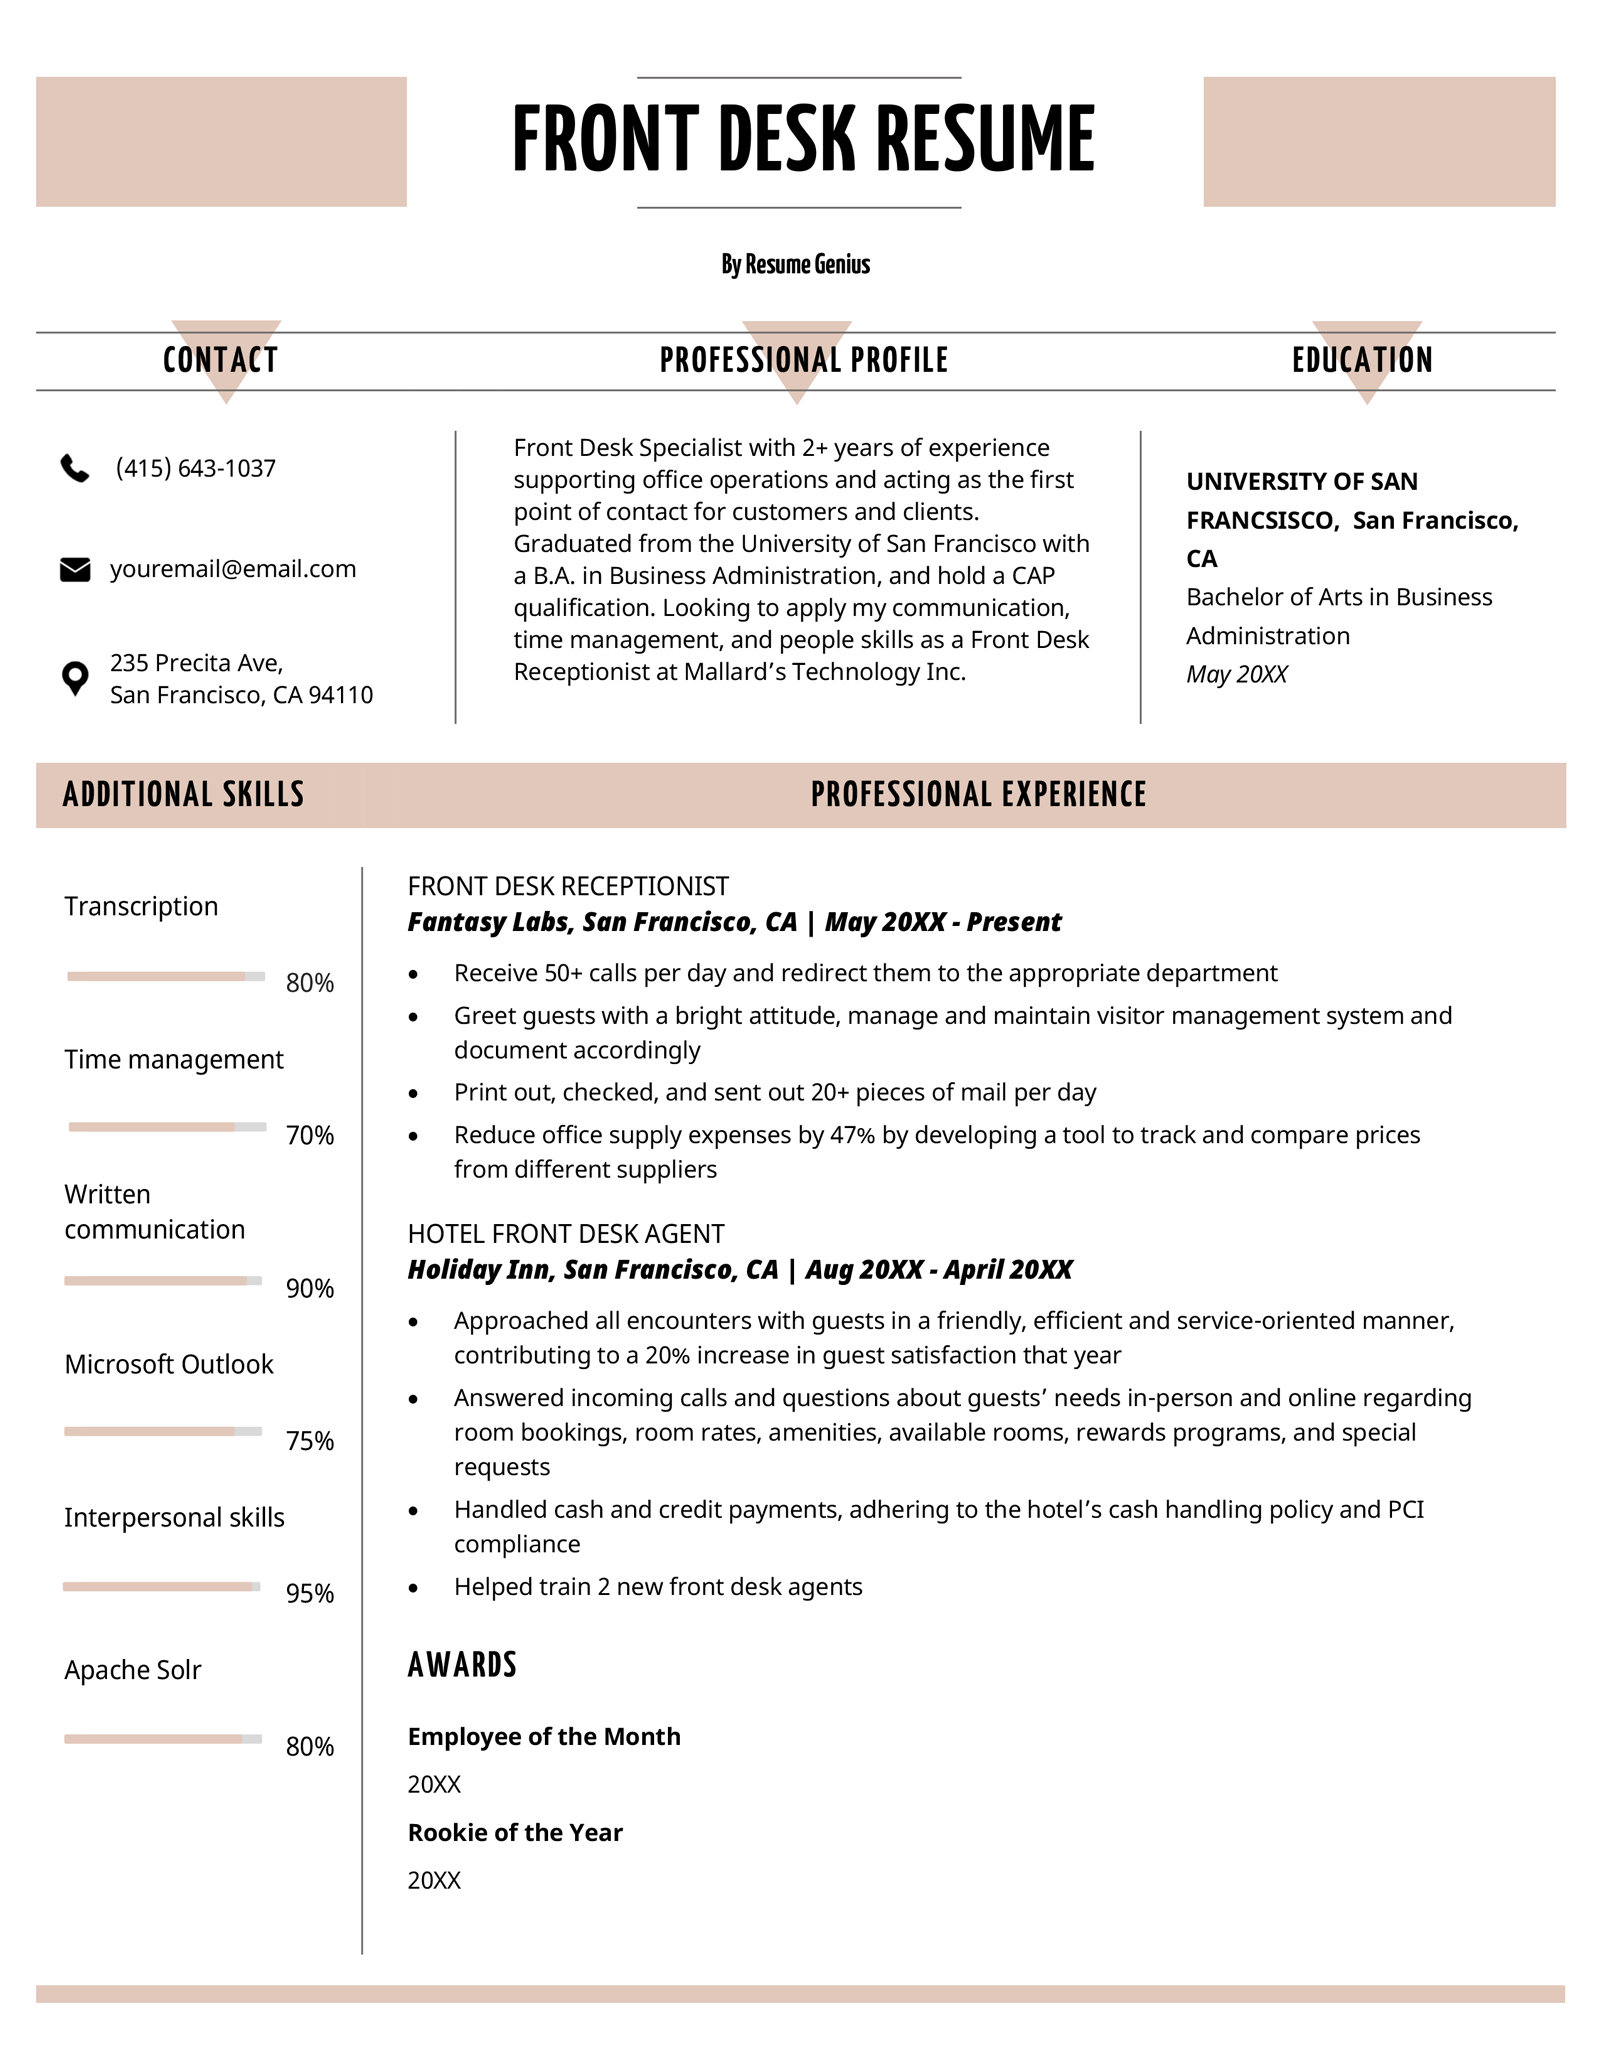 An orange color scheme used on a front desk resume example, that employs a unique three-column design at the top to clarify each section.